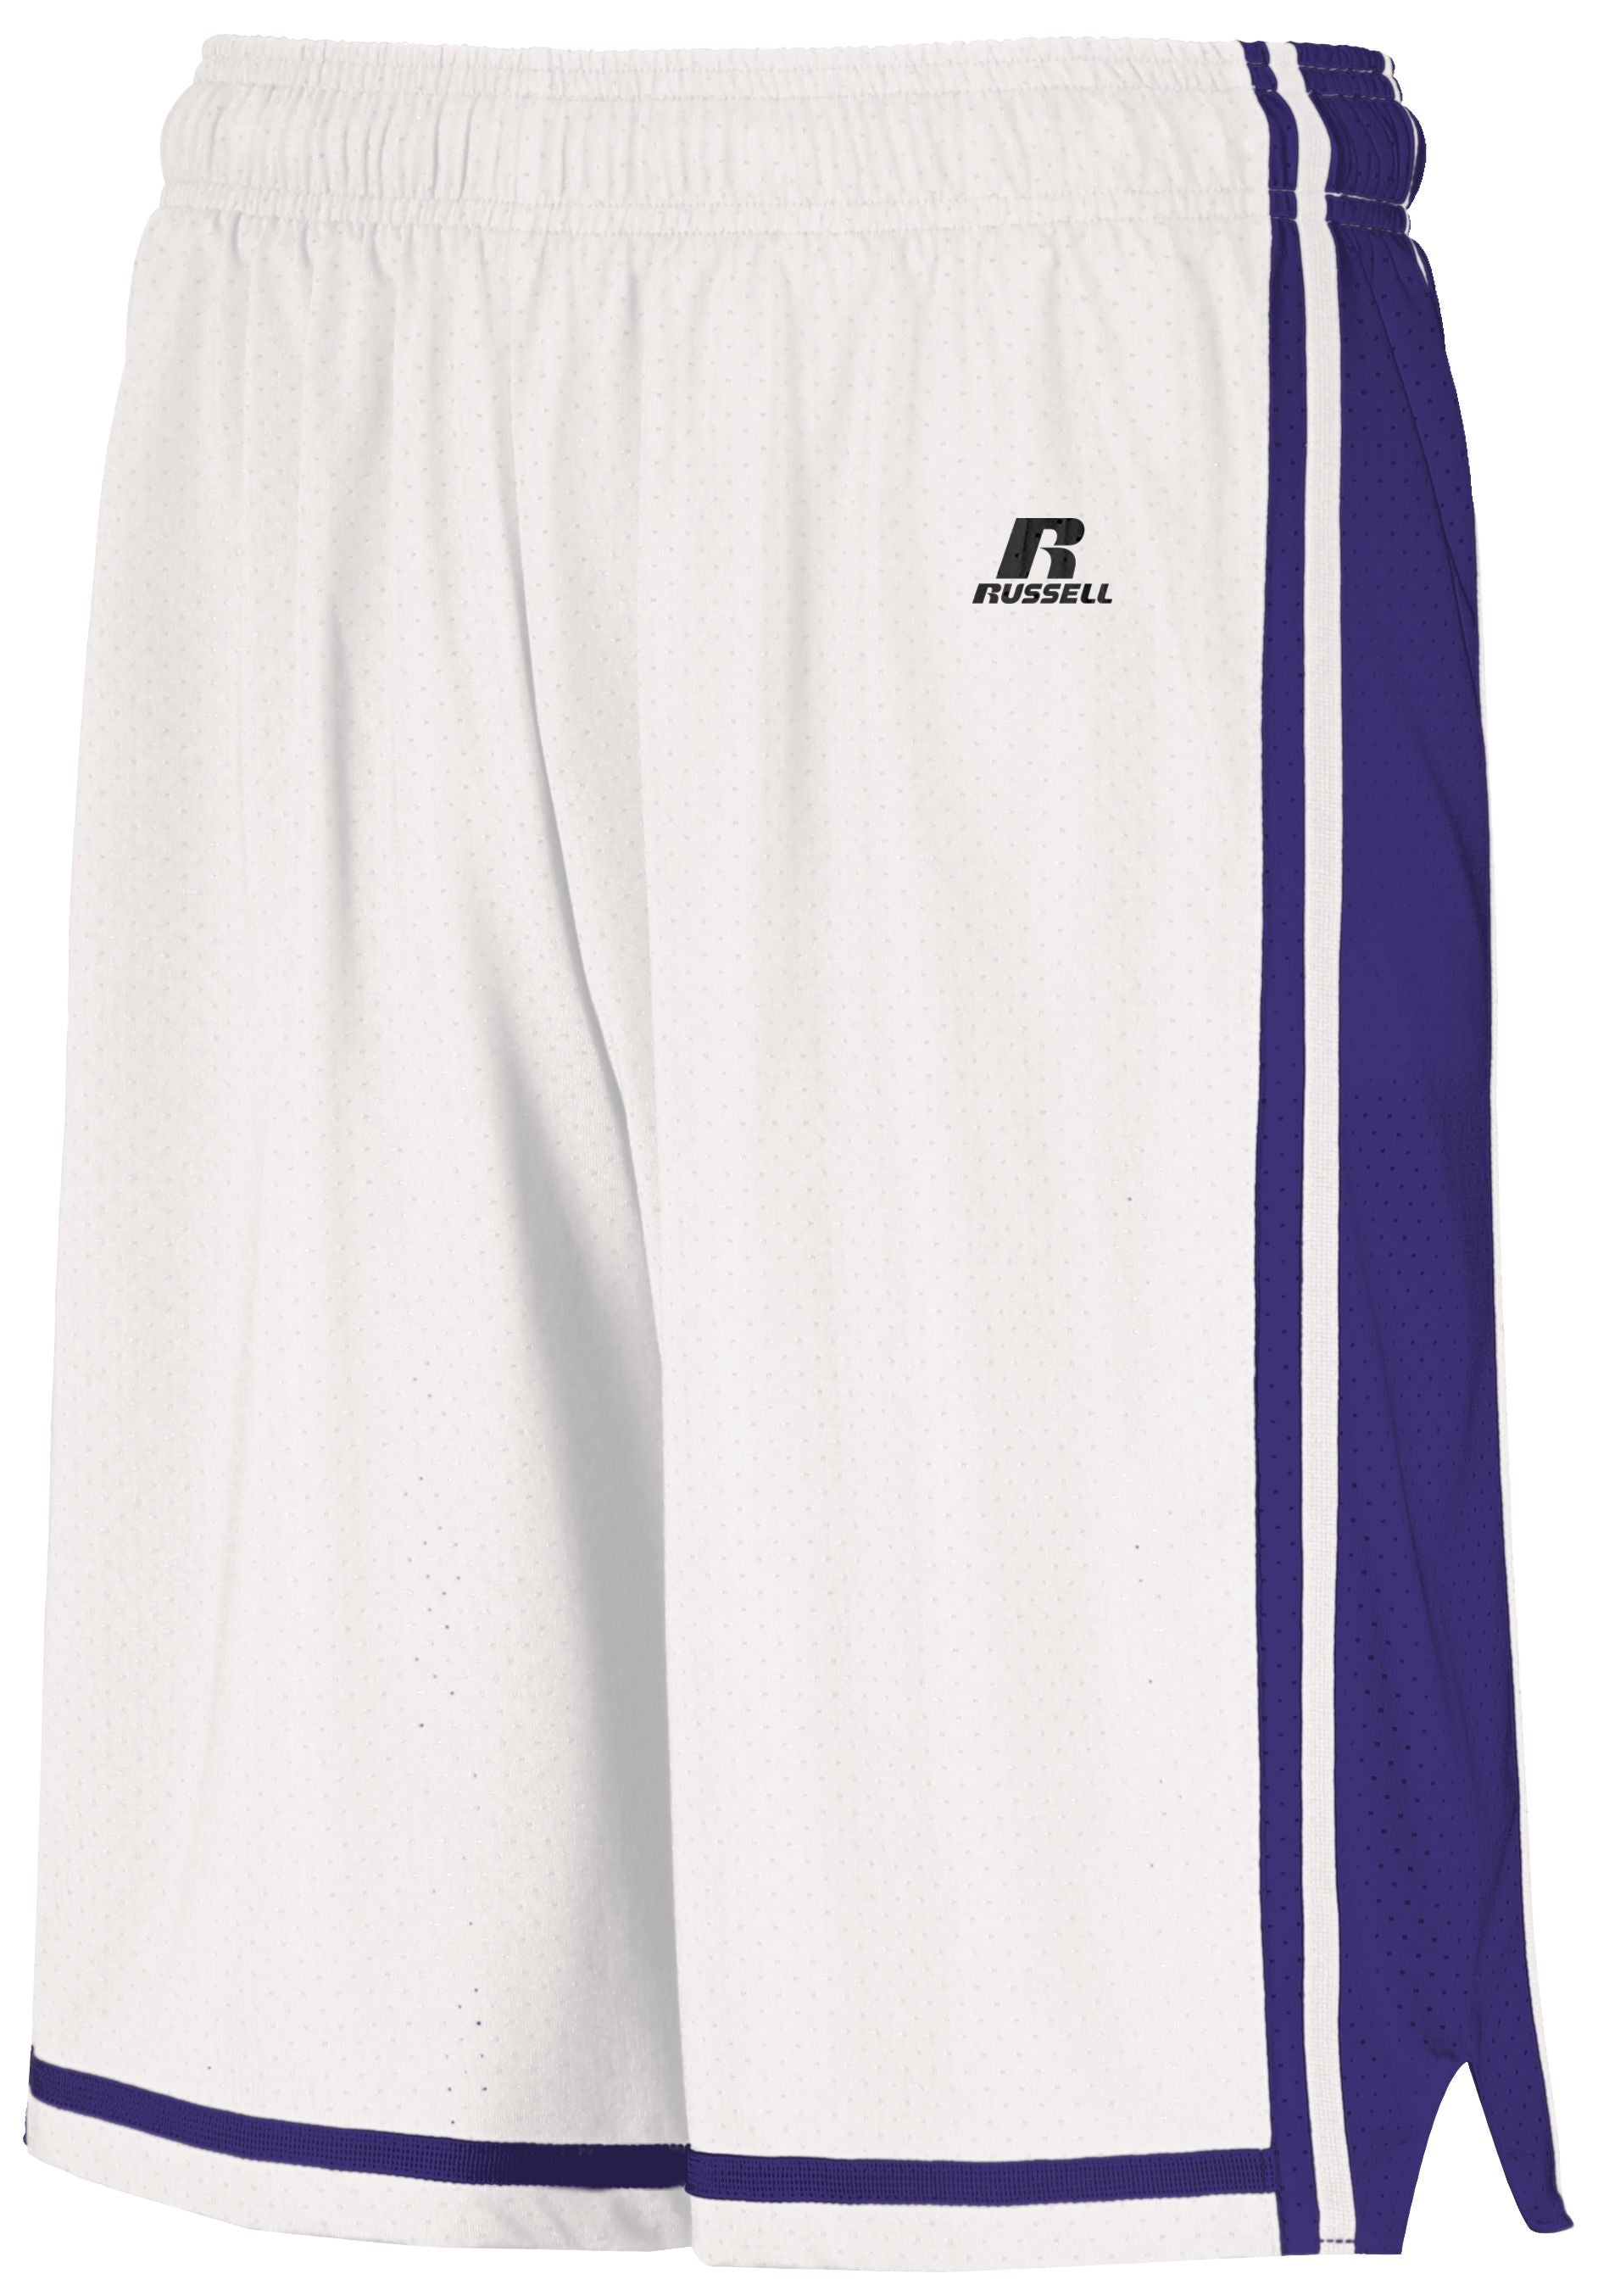 Russell Athletic Legacy Basketball Shorts in White/Purple  -Part of the Adult, Adult-Shorts, Basketball, Russell-Athletic-Products, All-Sports, All-Sports-1 product lines at KanaleyCreations.com